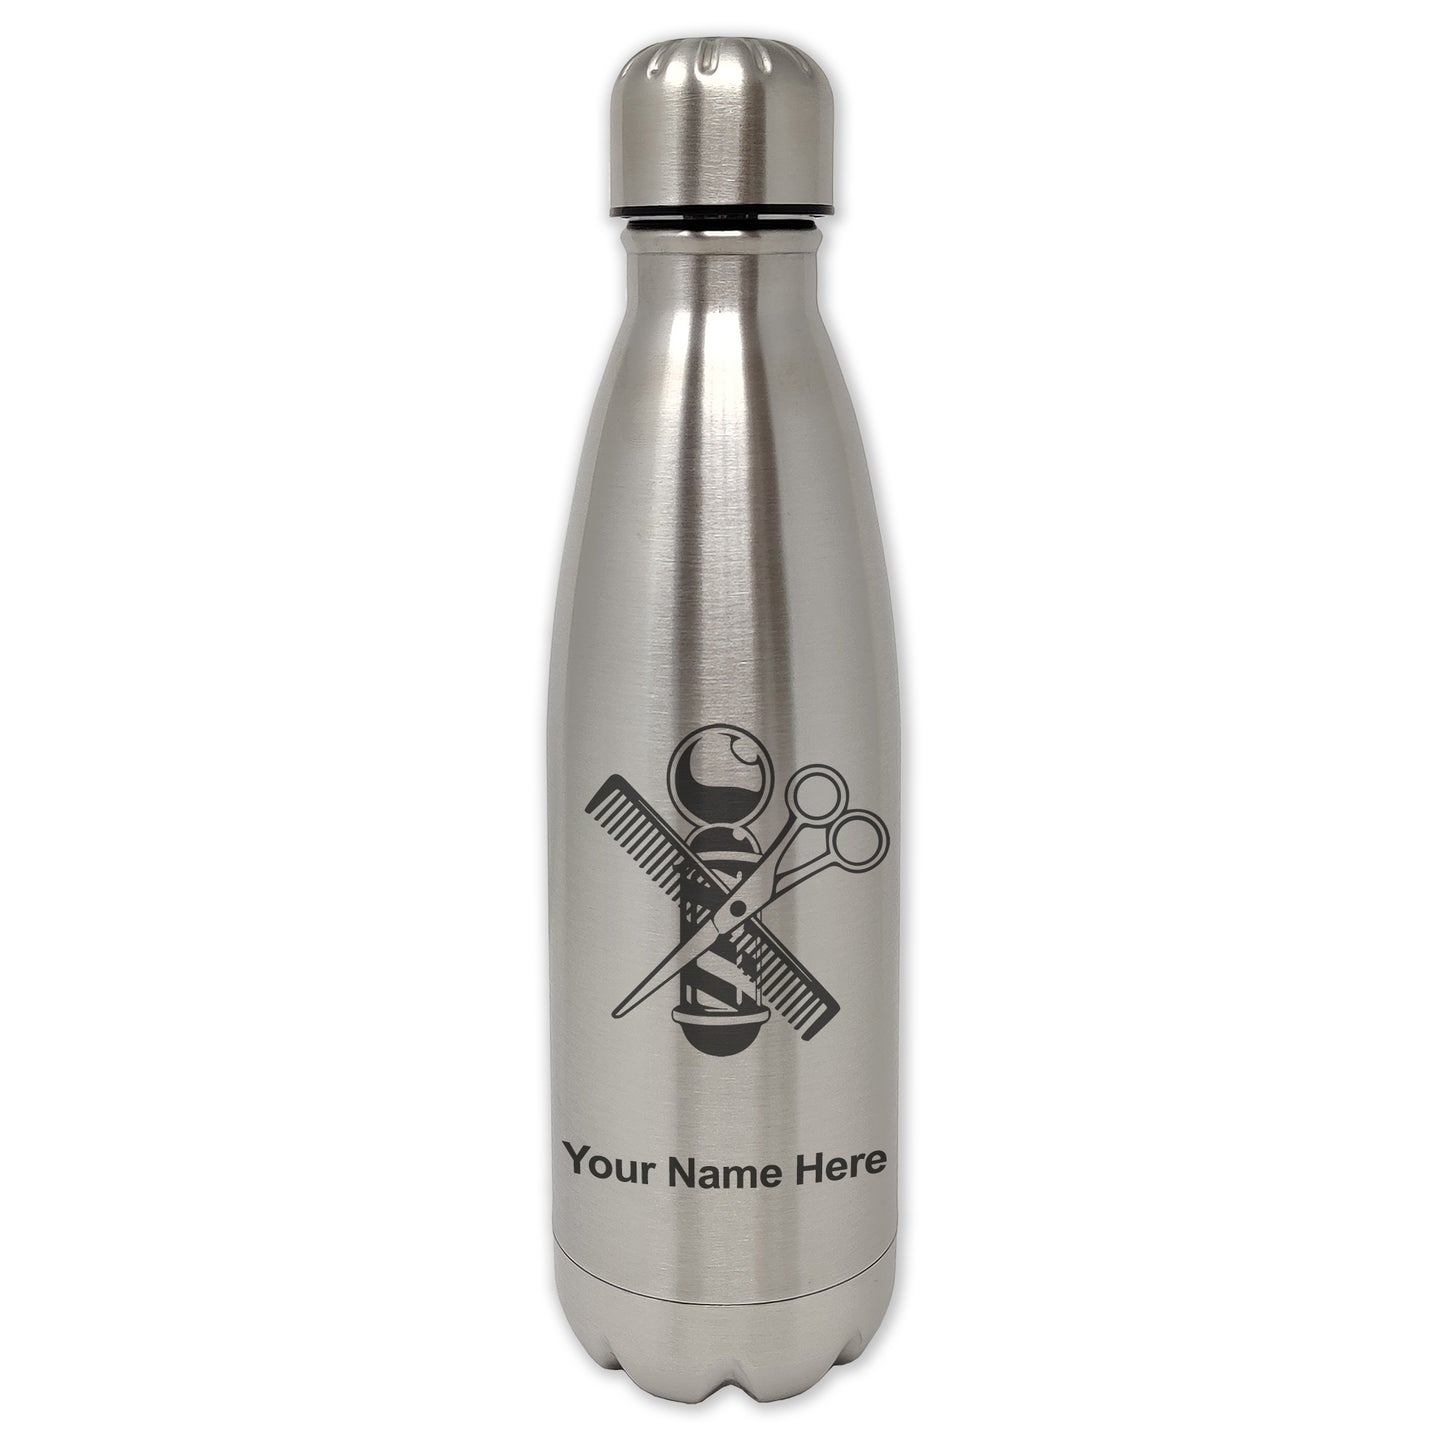 LaserGram Single Wall Water Bottle, Barber Shop Pole, Personalized Engraving Included